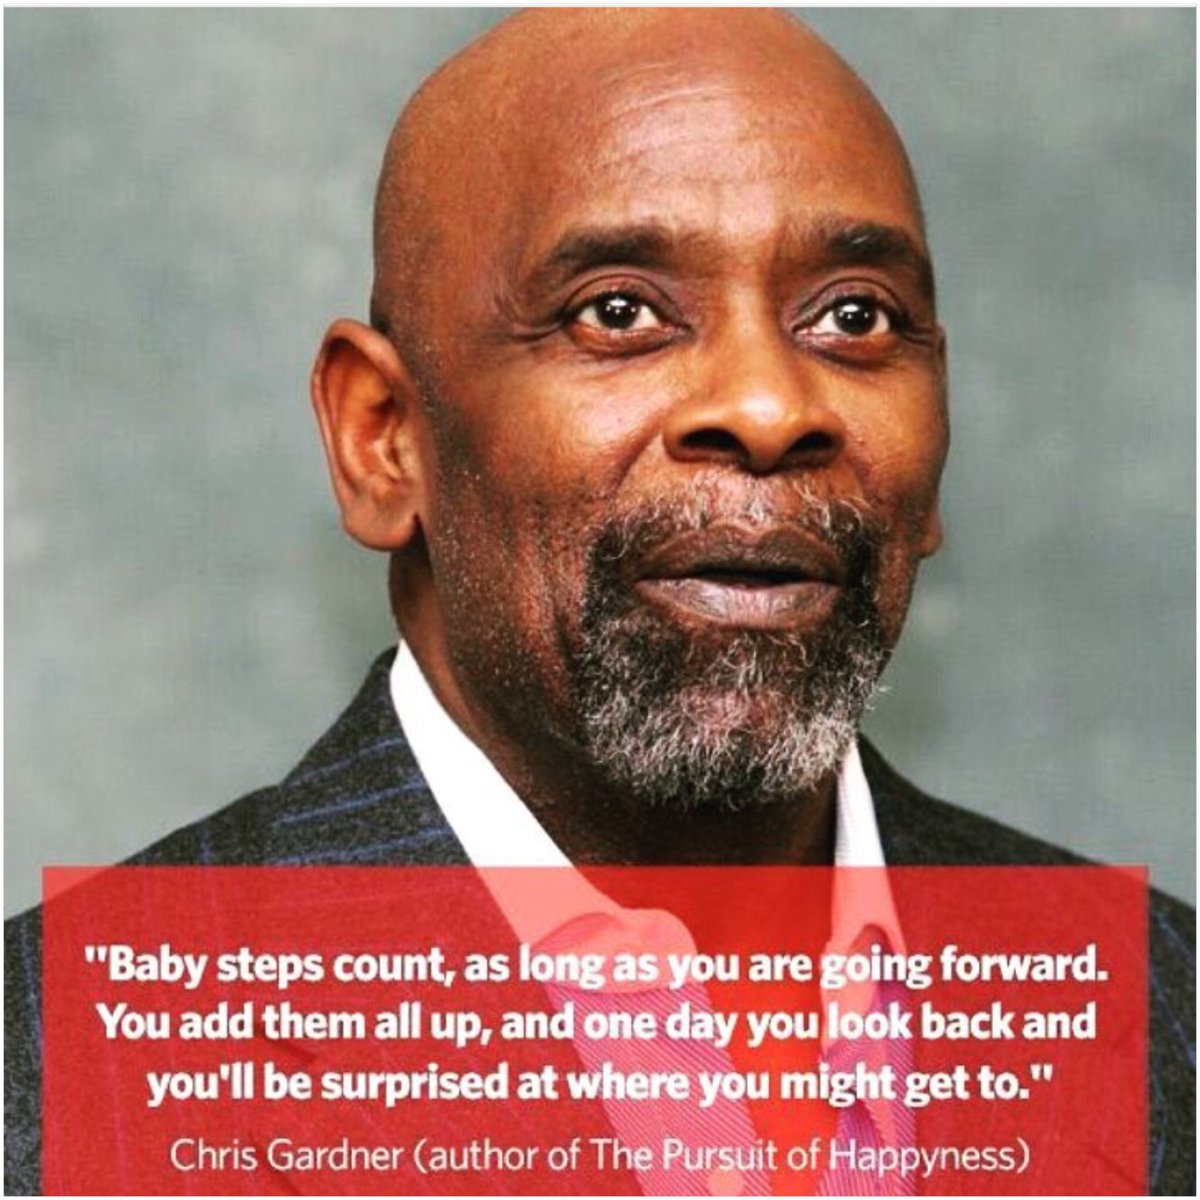 Where really is Chris Gardner today? 